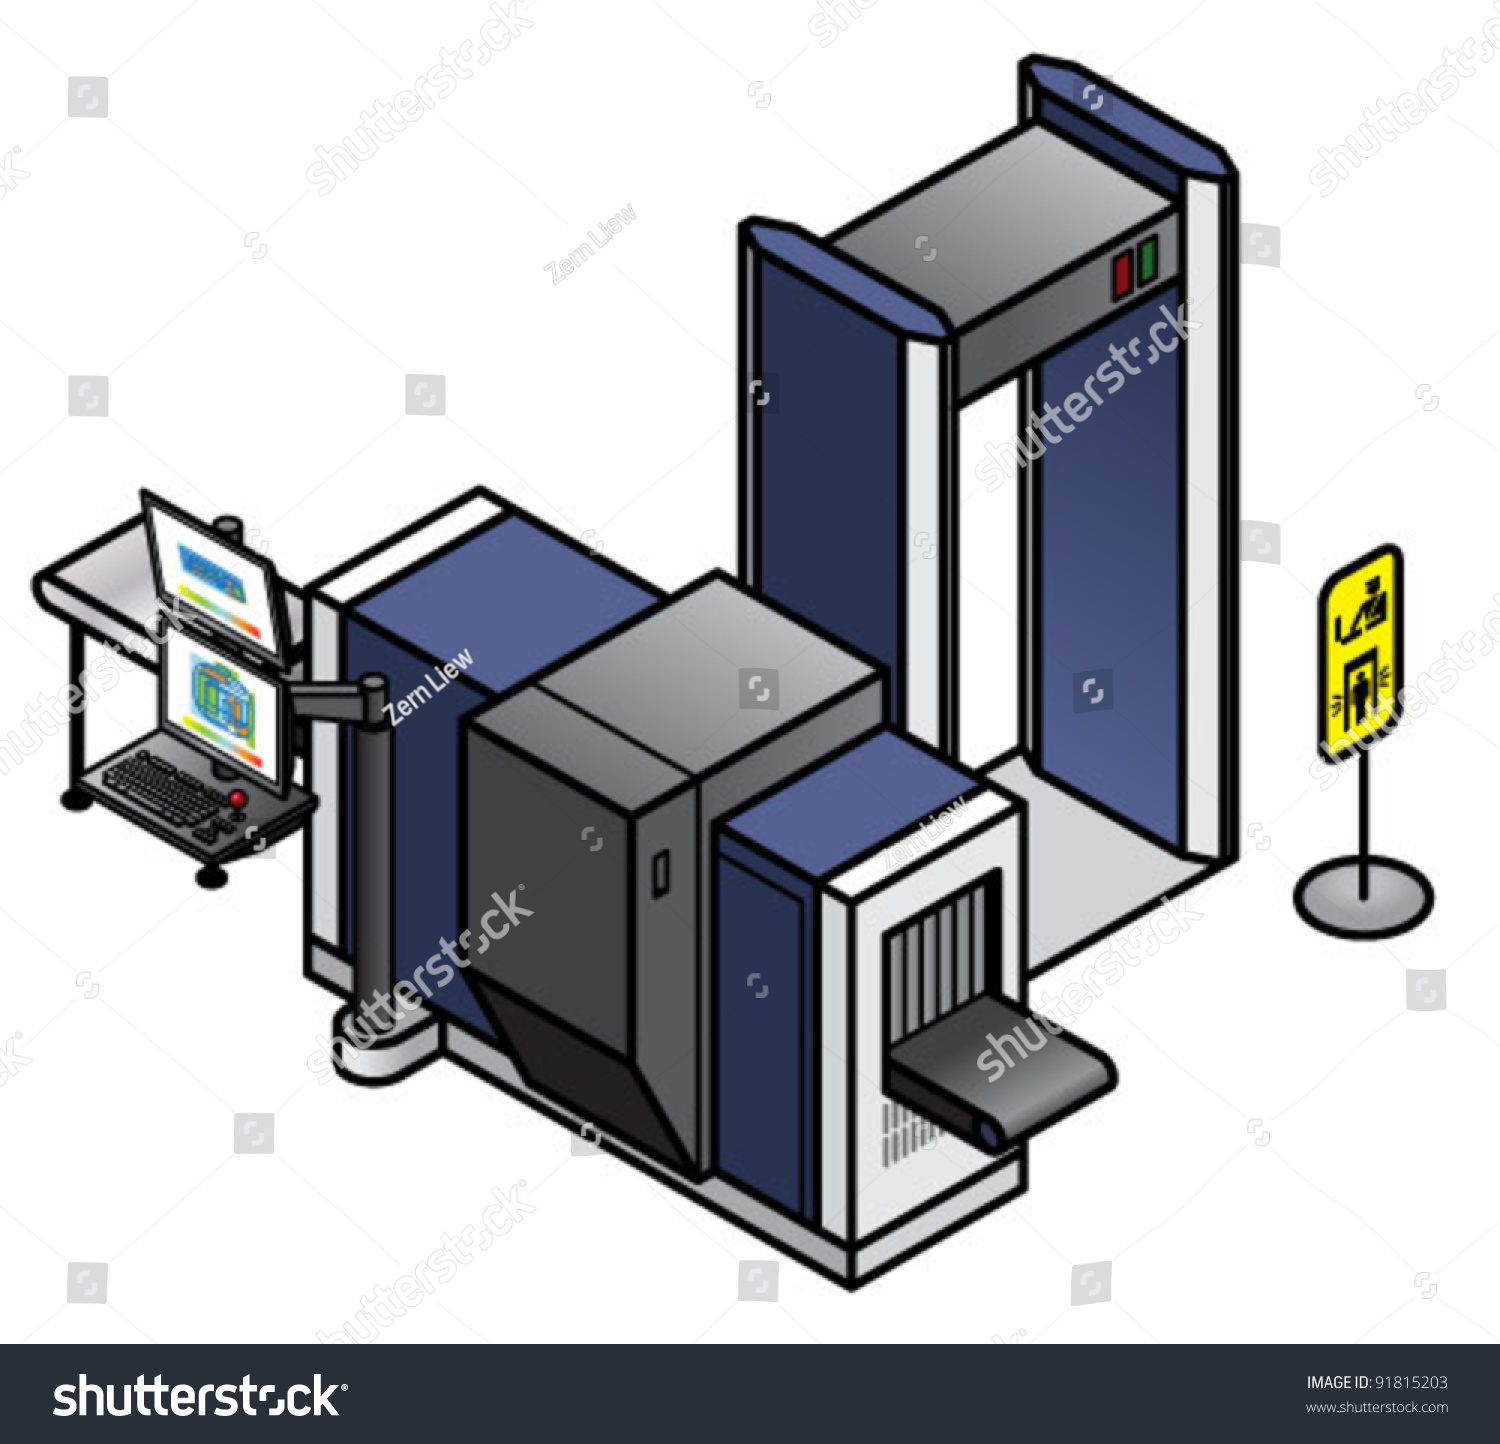 security check clipart - photo #38